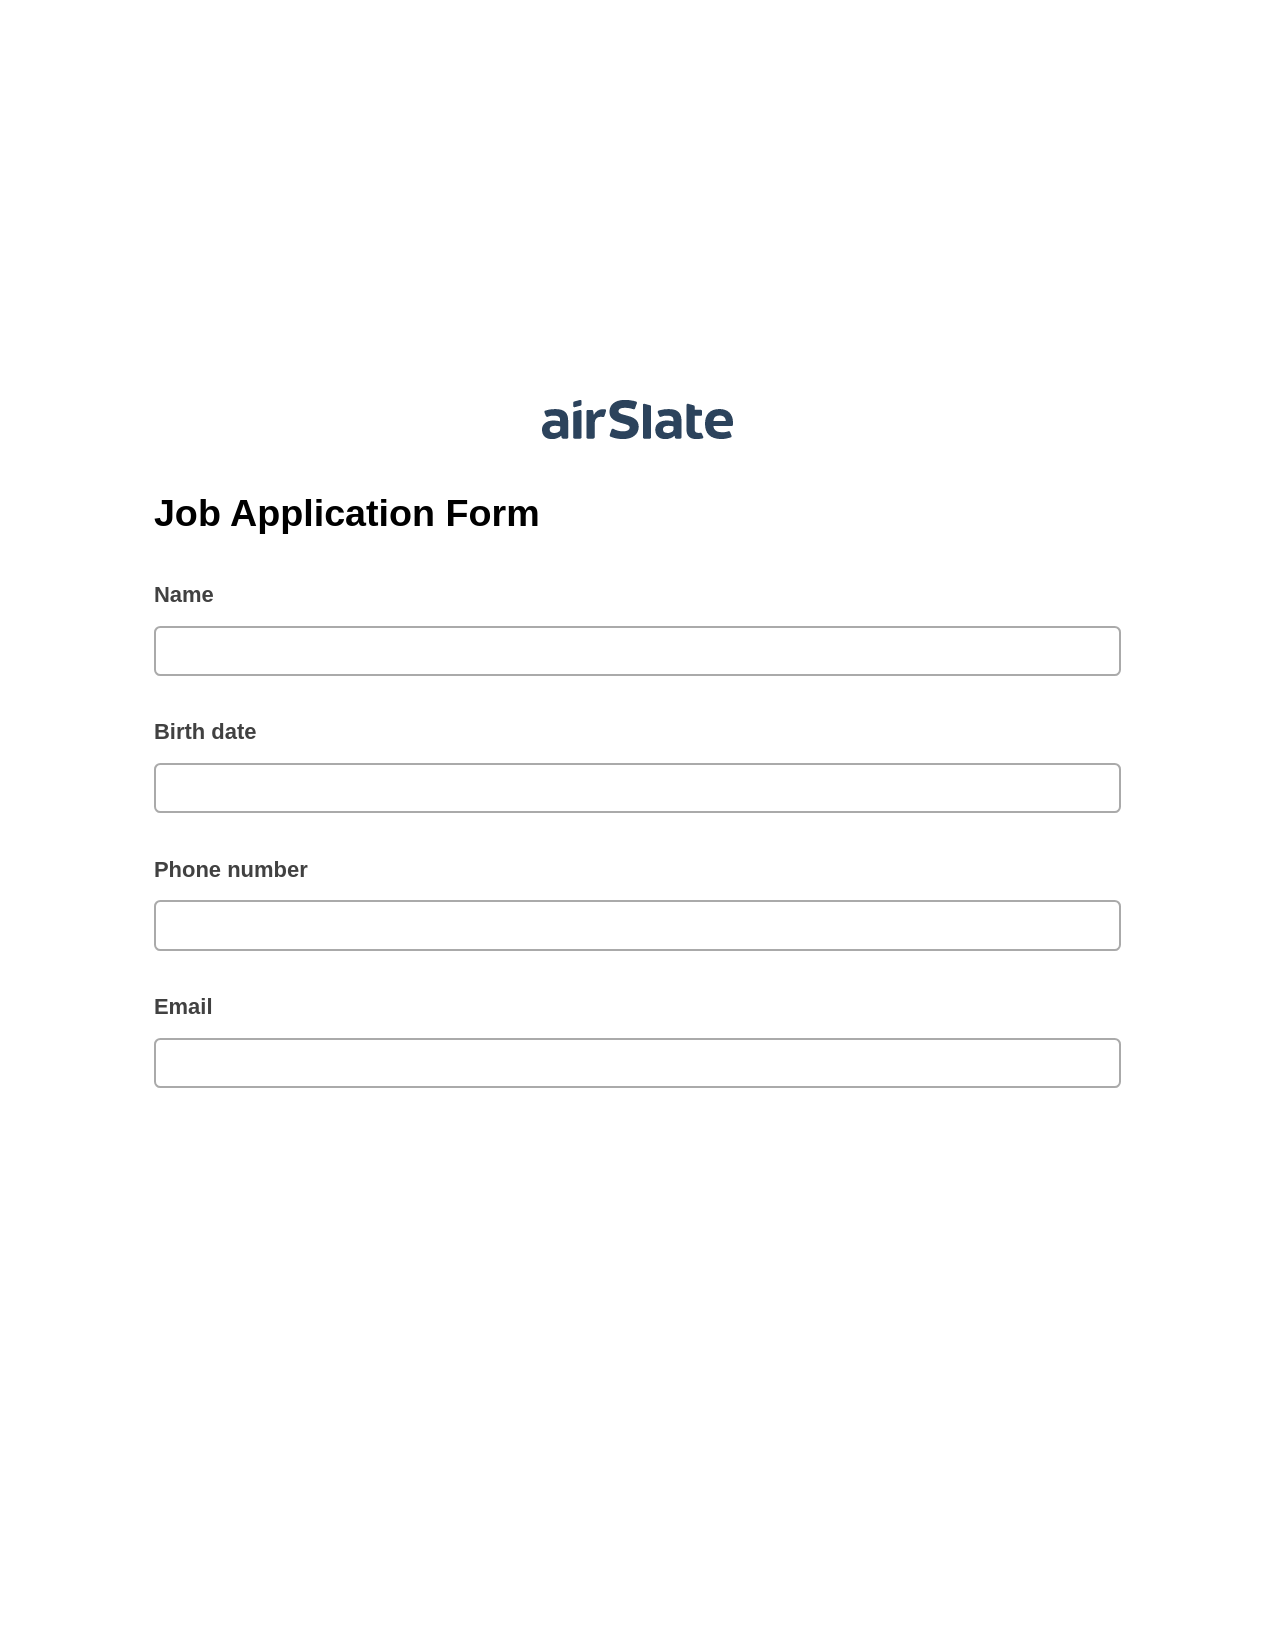 Job Application Form Pre-fill from CSV File Bot, Update NetSuite Records Bot, Export to NetSuite Record Bot